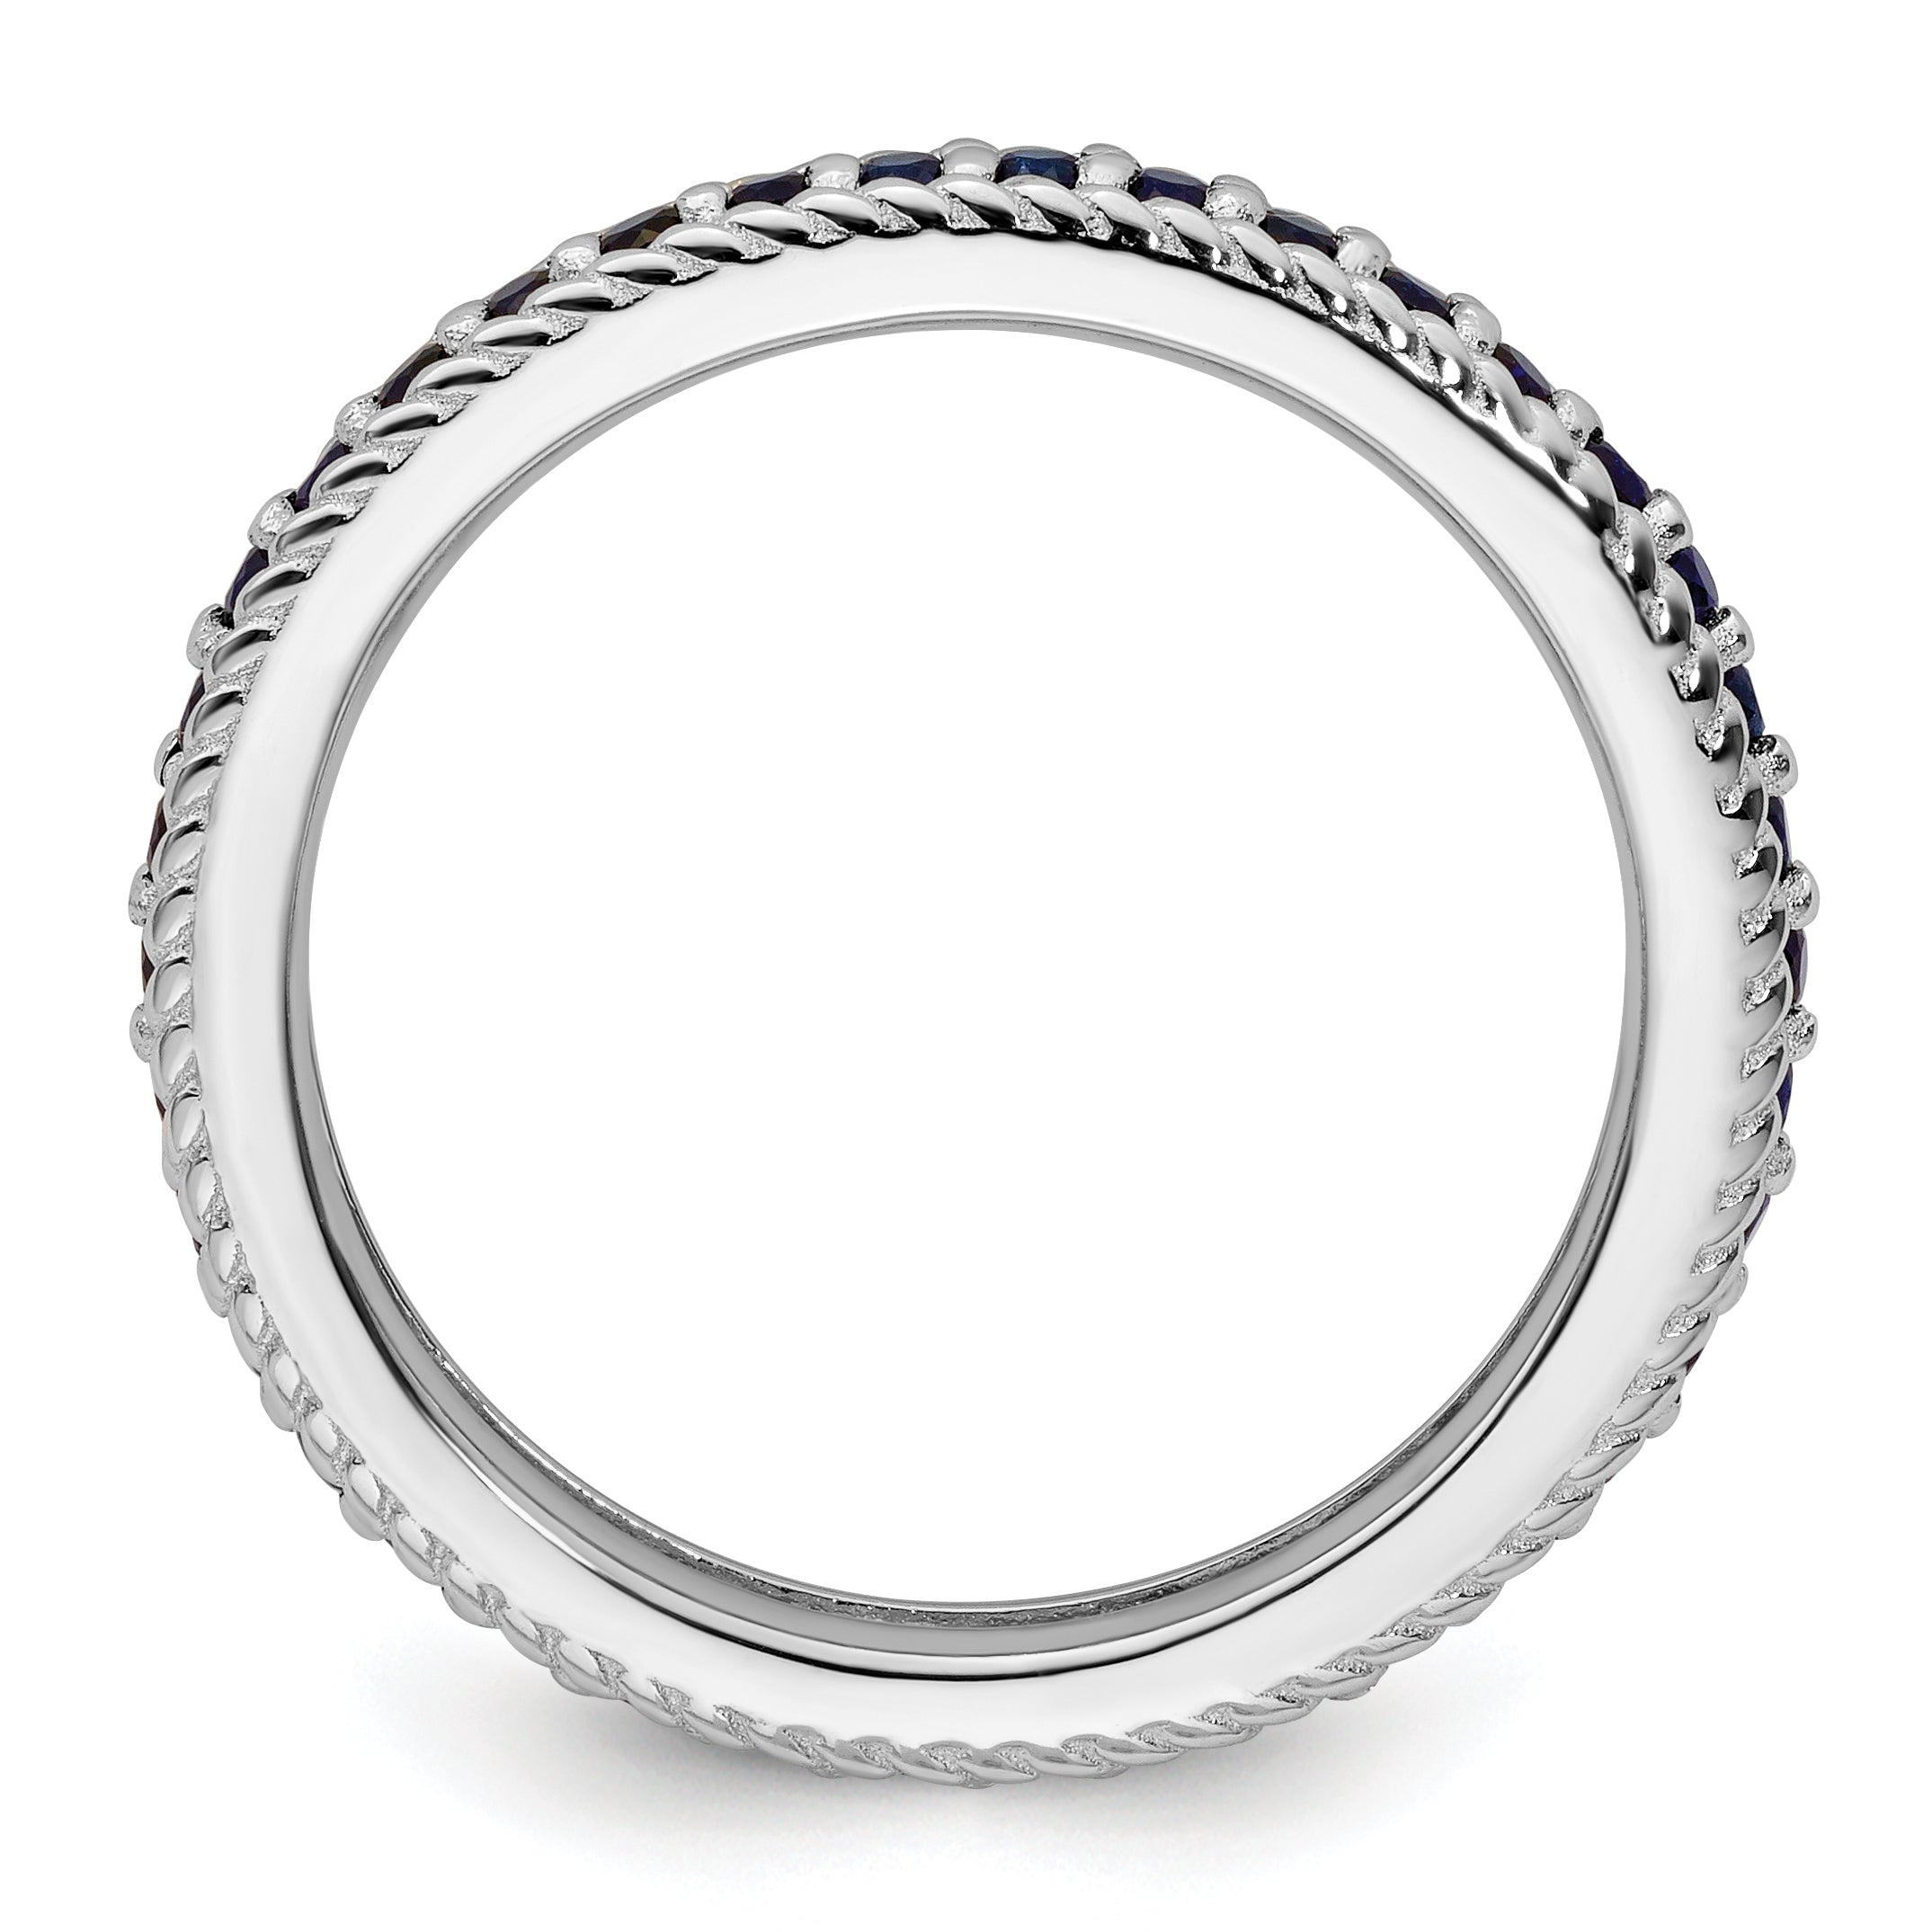 Sterling Silver Stackable Expressions Polished Cr. Sapphire Eternity Ring